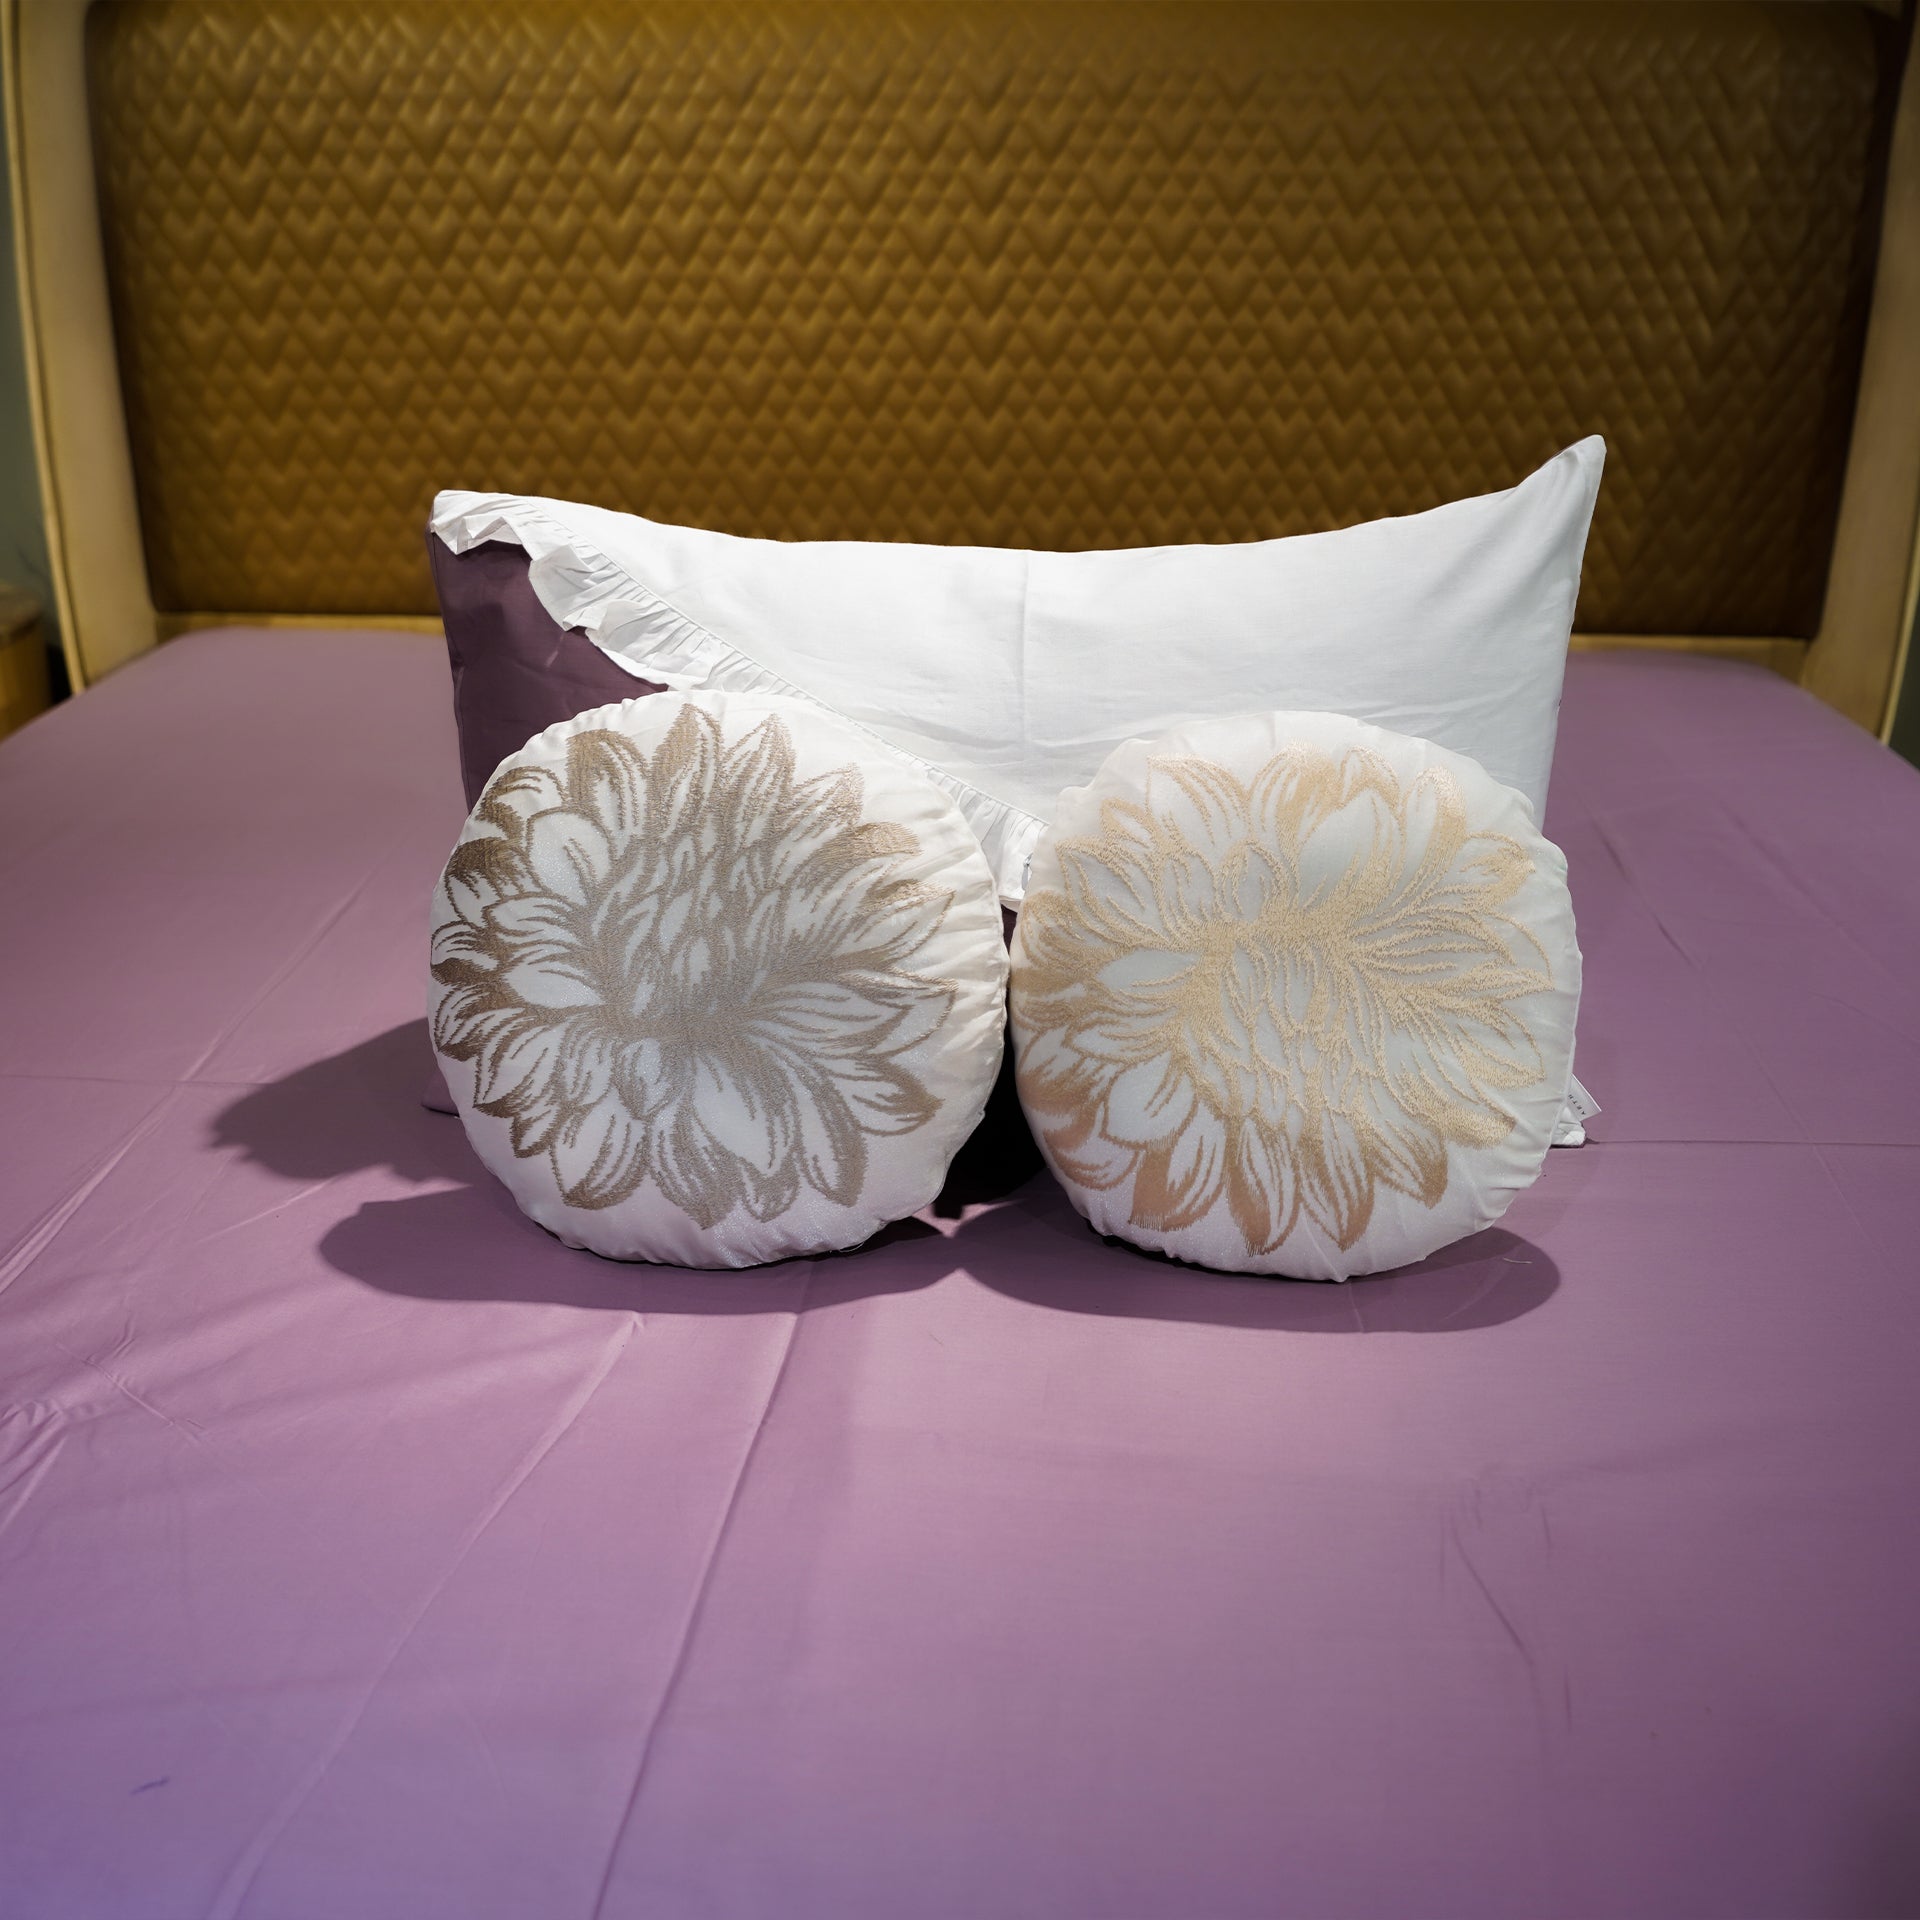 Whispering Lily Bed Cover with Pillow Covers & Cushion/s at Kamakhyaa by Aetherea. This item is Bed Covers, Cushion, Flower, Frills, Home, Lavender, Purple, Upcycled, White